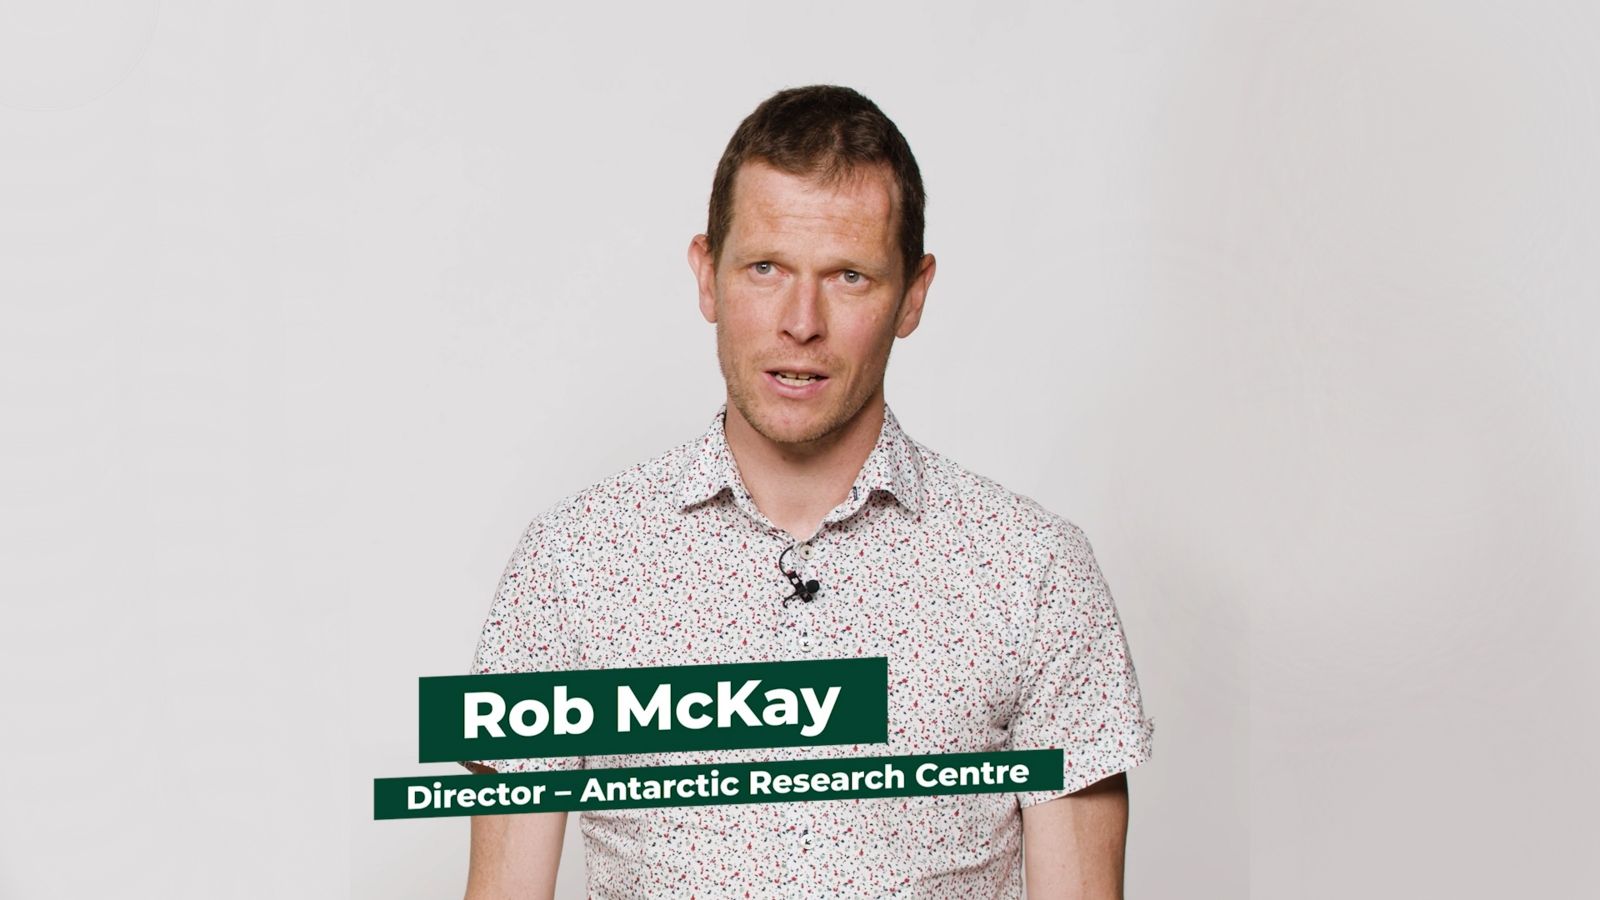 Associate Professor Rob McKay stands facing the camera against a white backrop